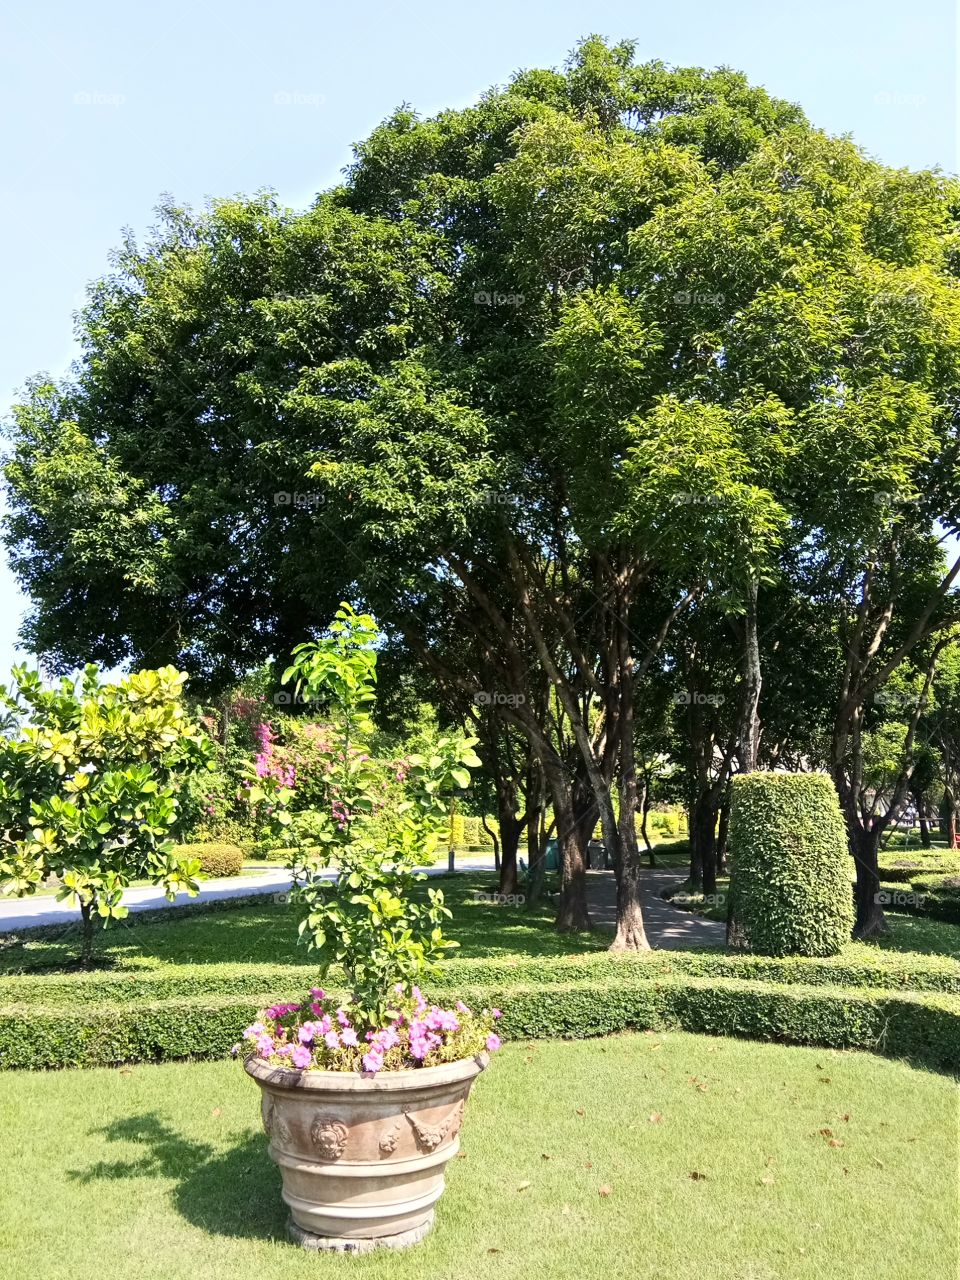 View : Cactus :Tree : Flower at Suan Luang Rama IX Public Park.The park was a gift to His Majesty the King on the auspicious occasion of his 5th Cycle Birthday Anniversary in 1987: King Rama IX : King Bhumibhol : Thailand : thai